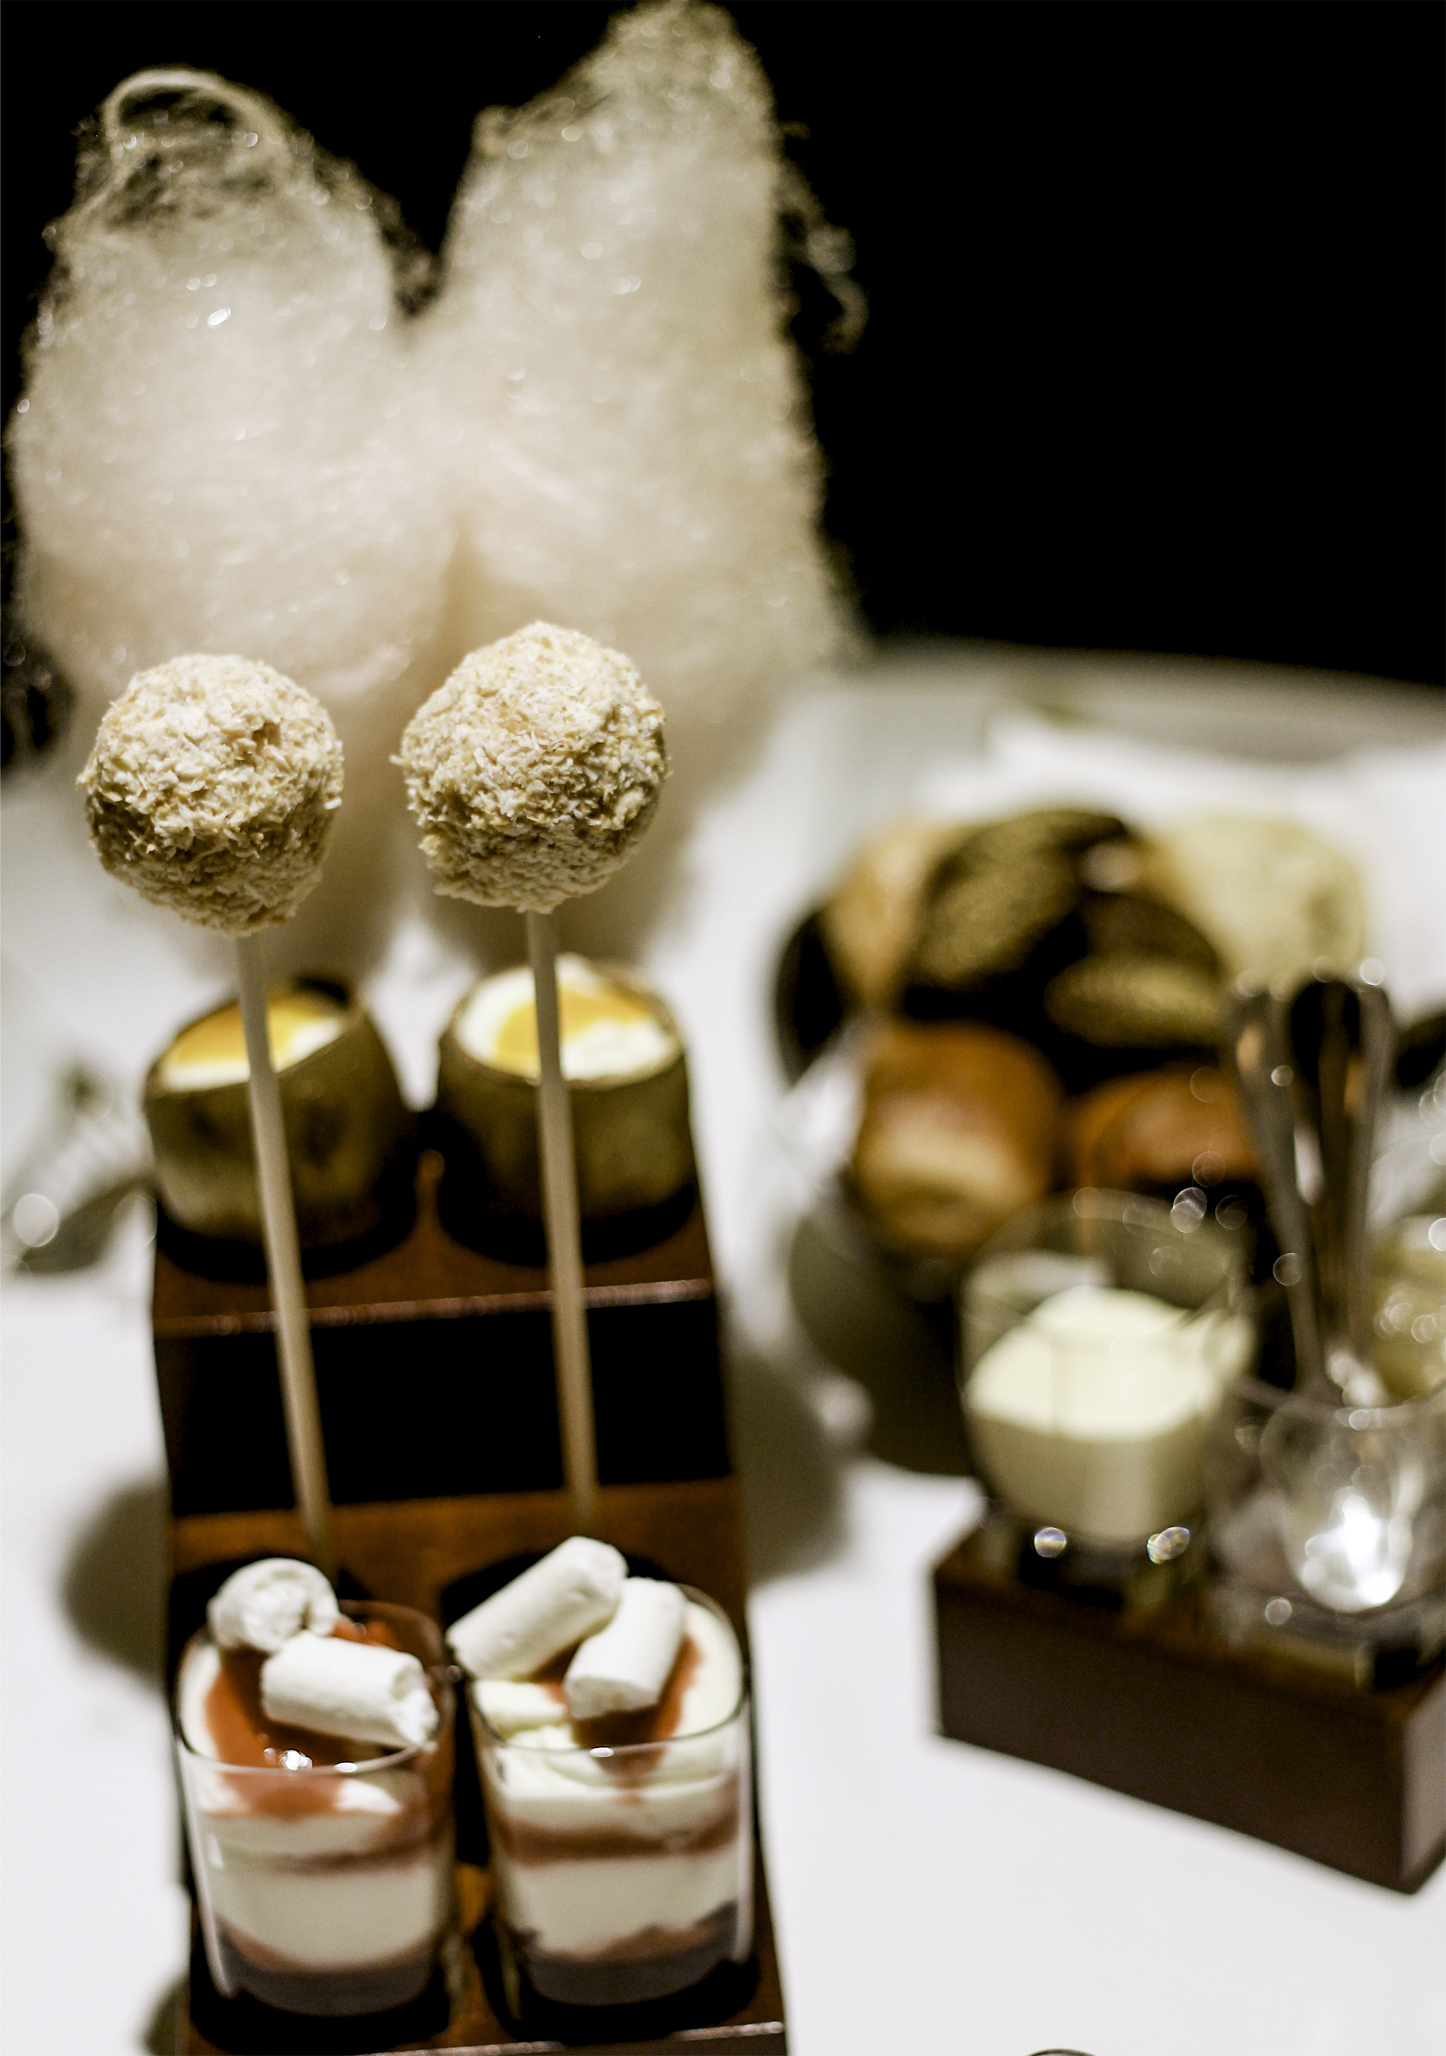 Charlie and the chocolate factory afternoon tea at one aldwych 6.jpg